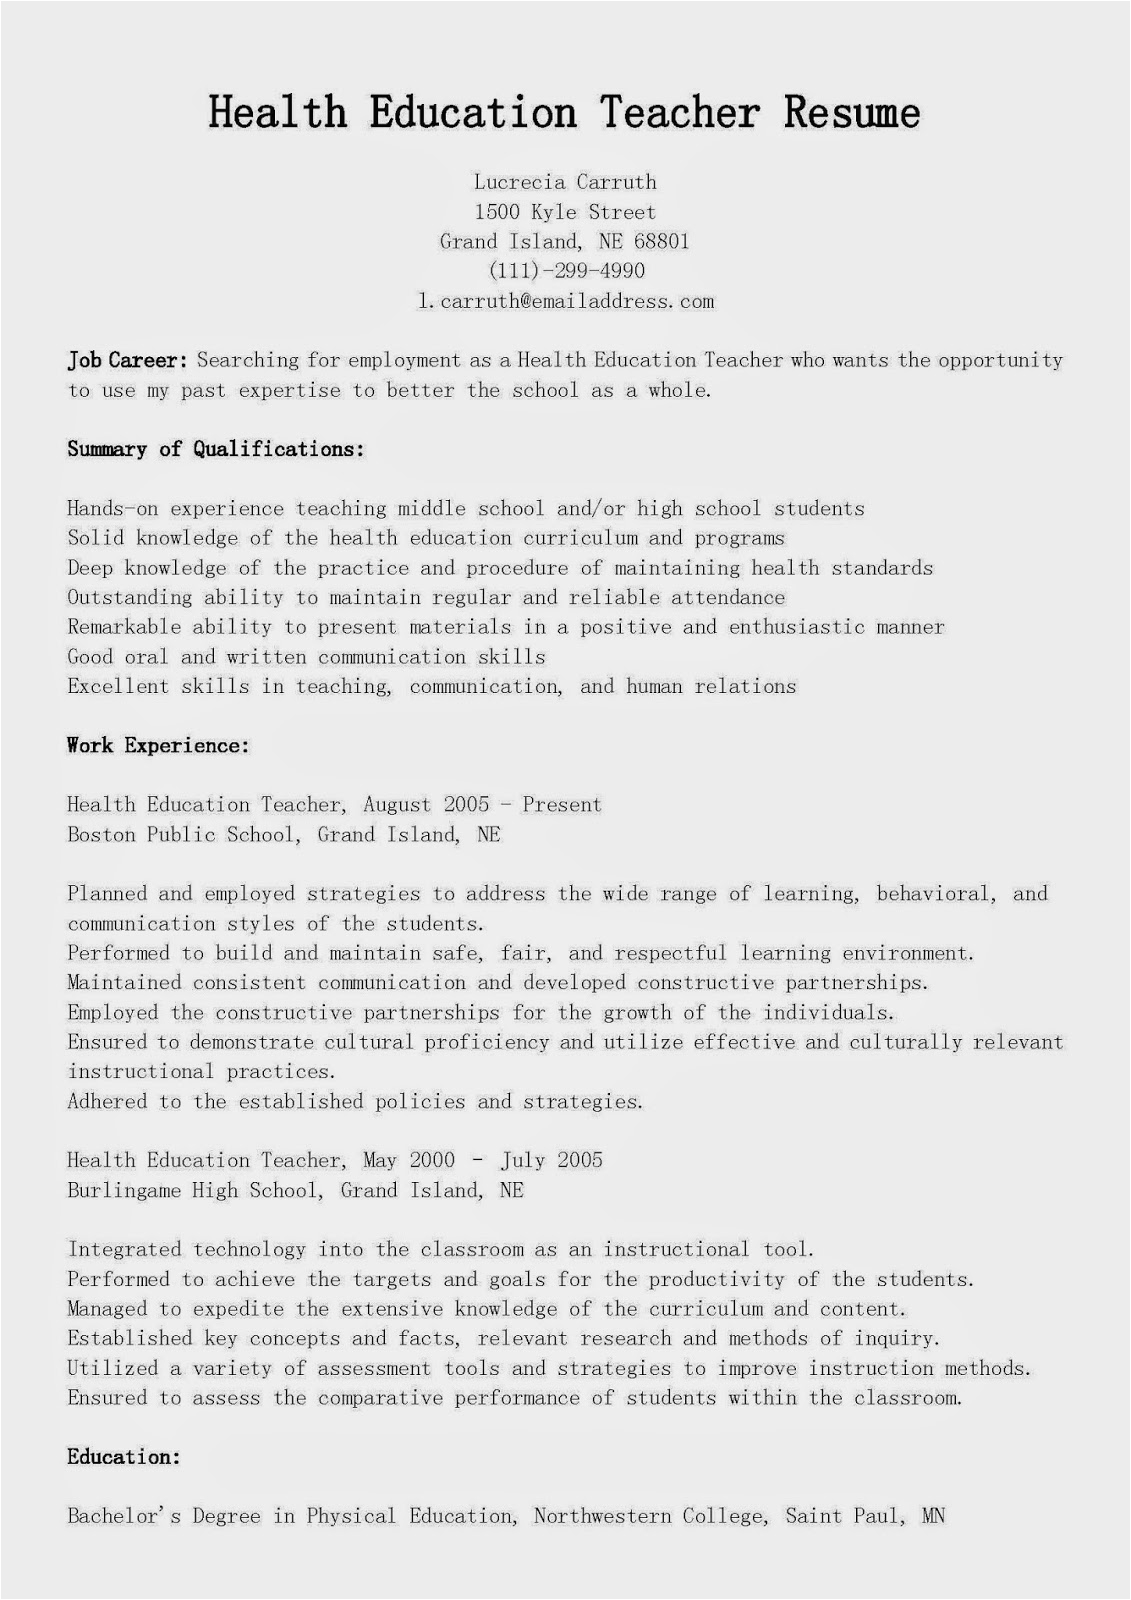 Health and Physical Education Resume Sample Resume Samples Health Education Teacher Resume Sample